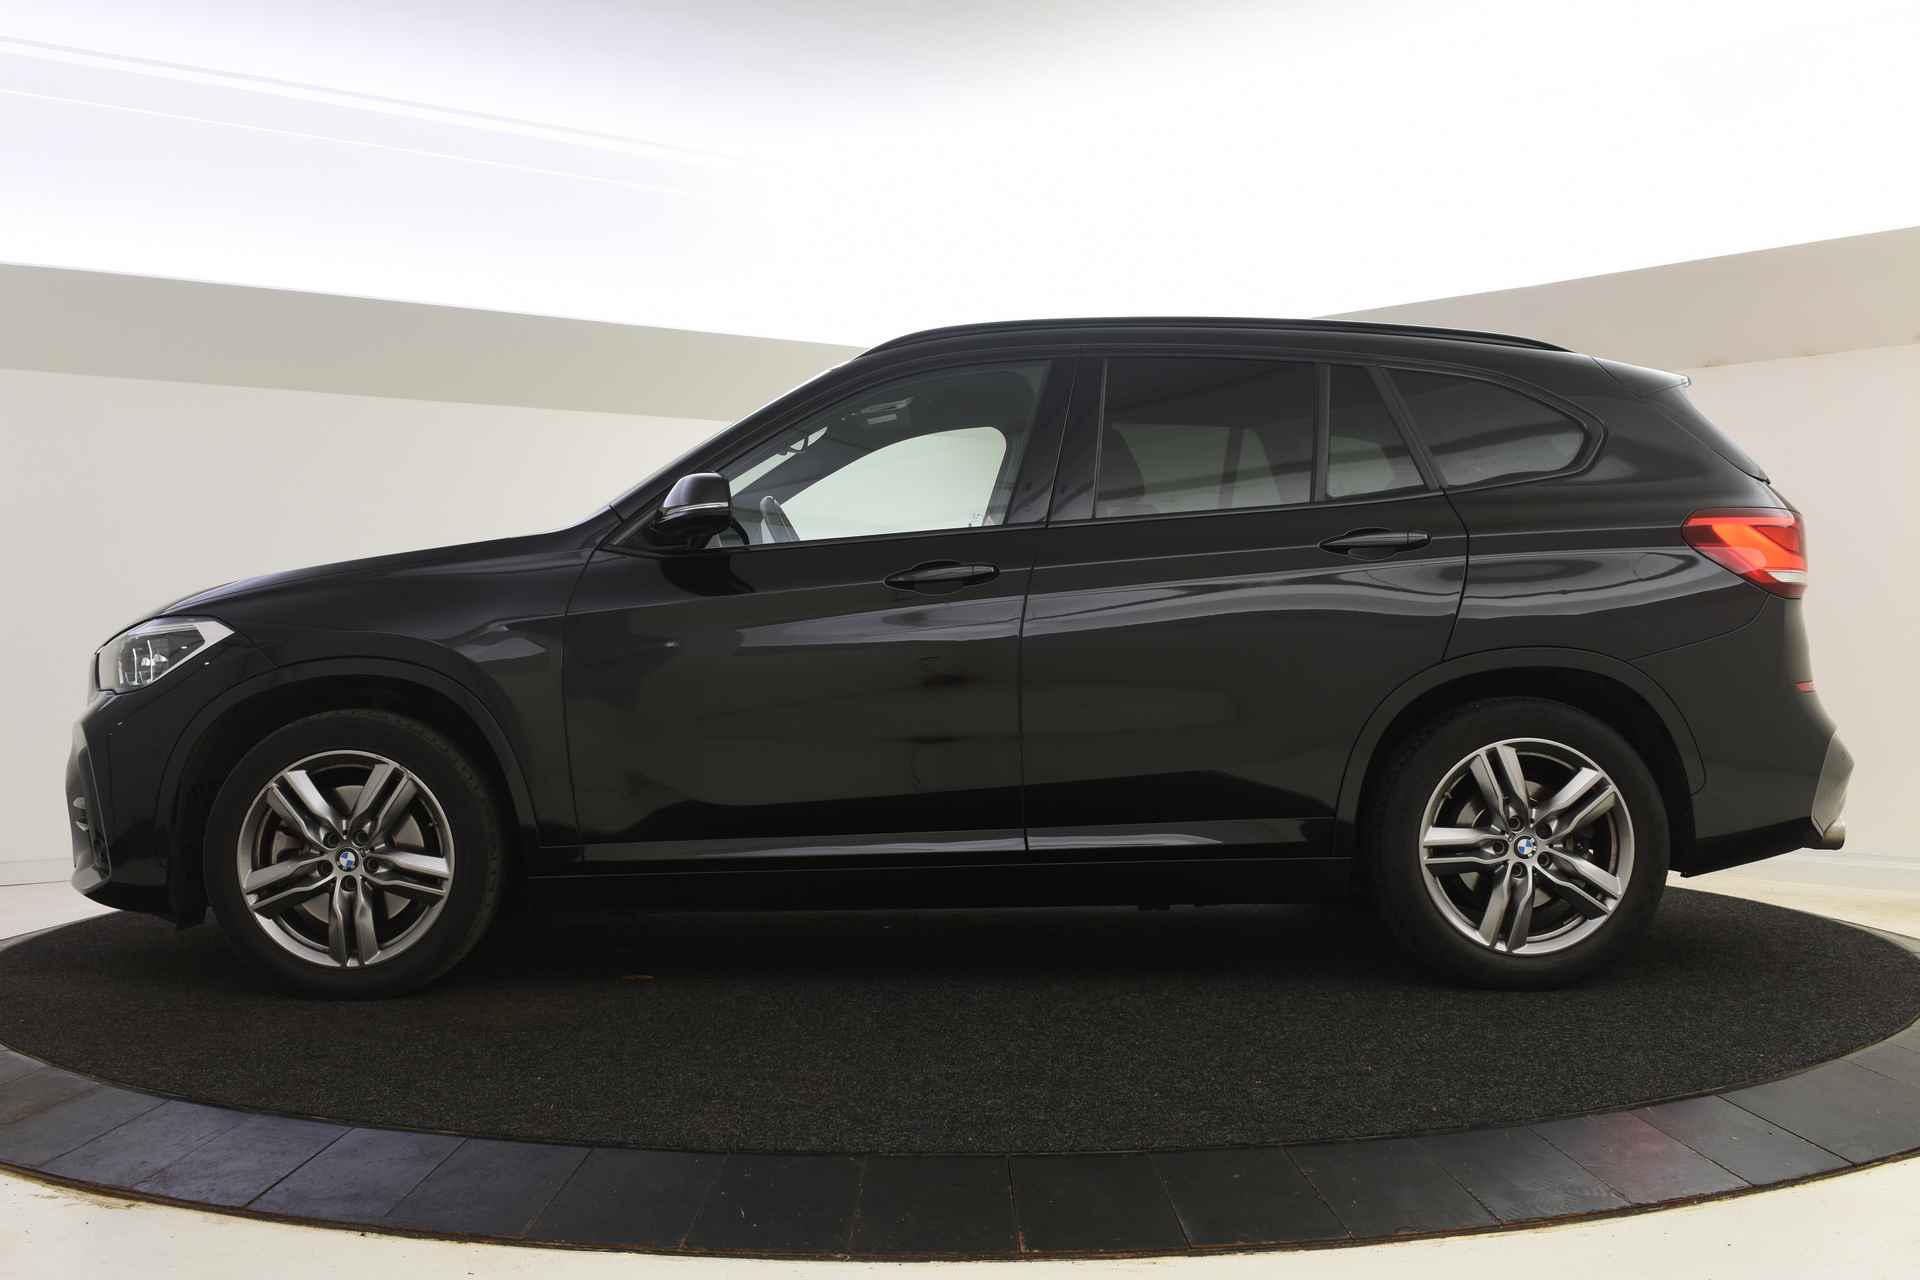 BMW X1 sDrive20i Executive M Sport Automaat / Sportstoelen / Adaptieve LED / Active Cruise Control / Achteruitrijcamera / Head-Up / Park Assistant / Driving Assistant Plus - 4/47